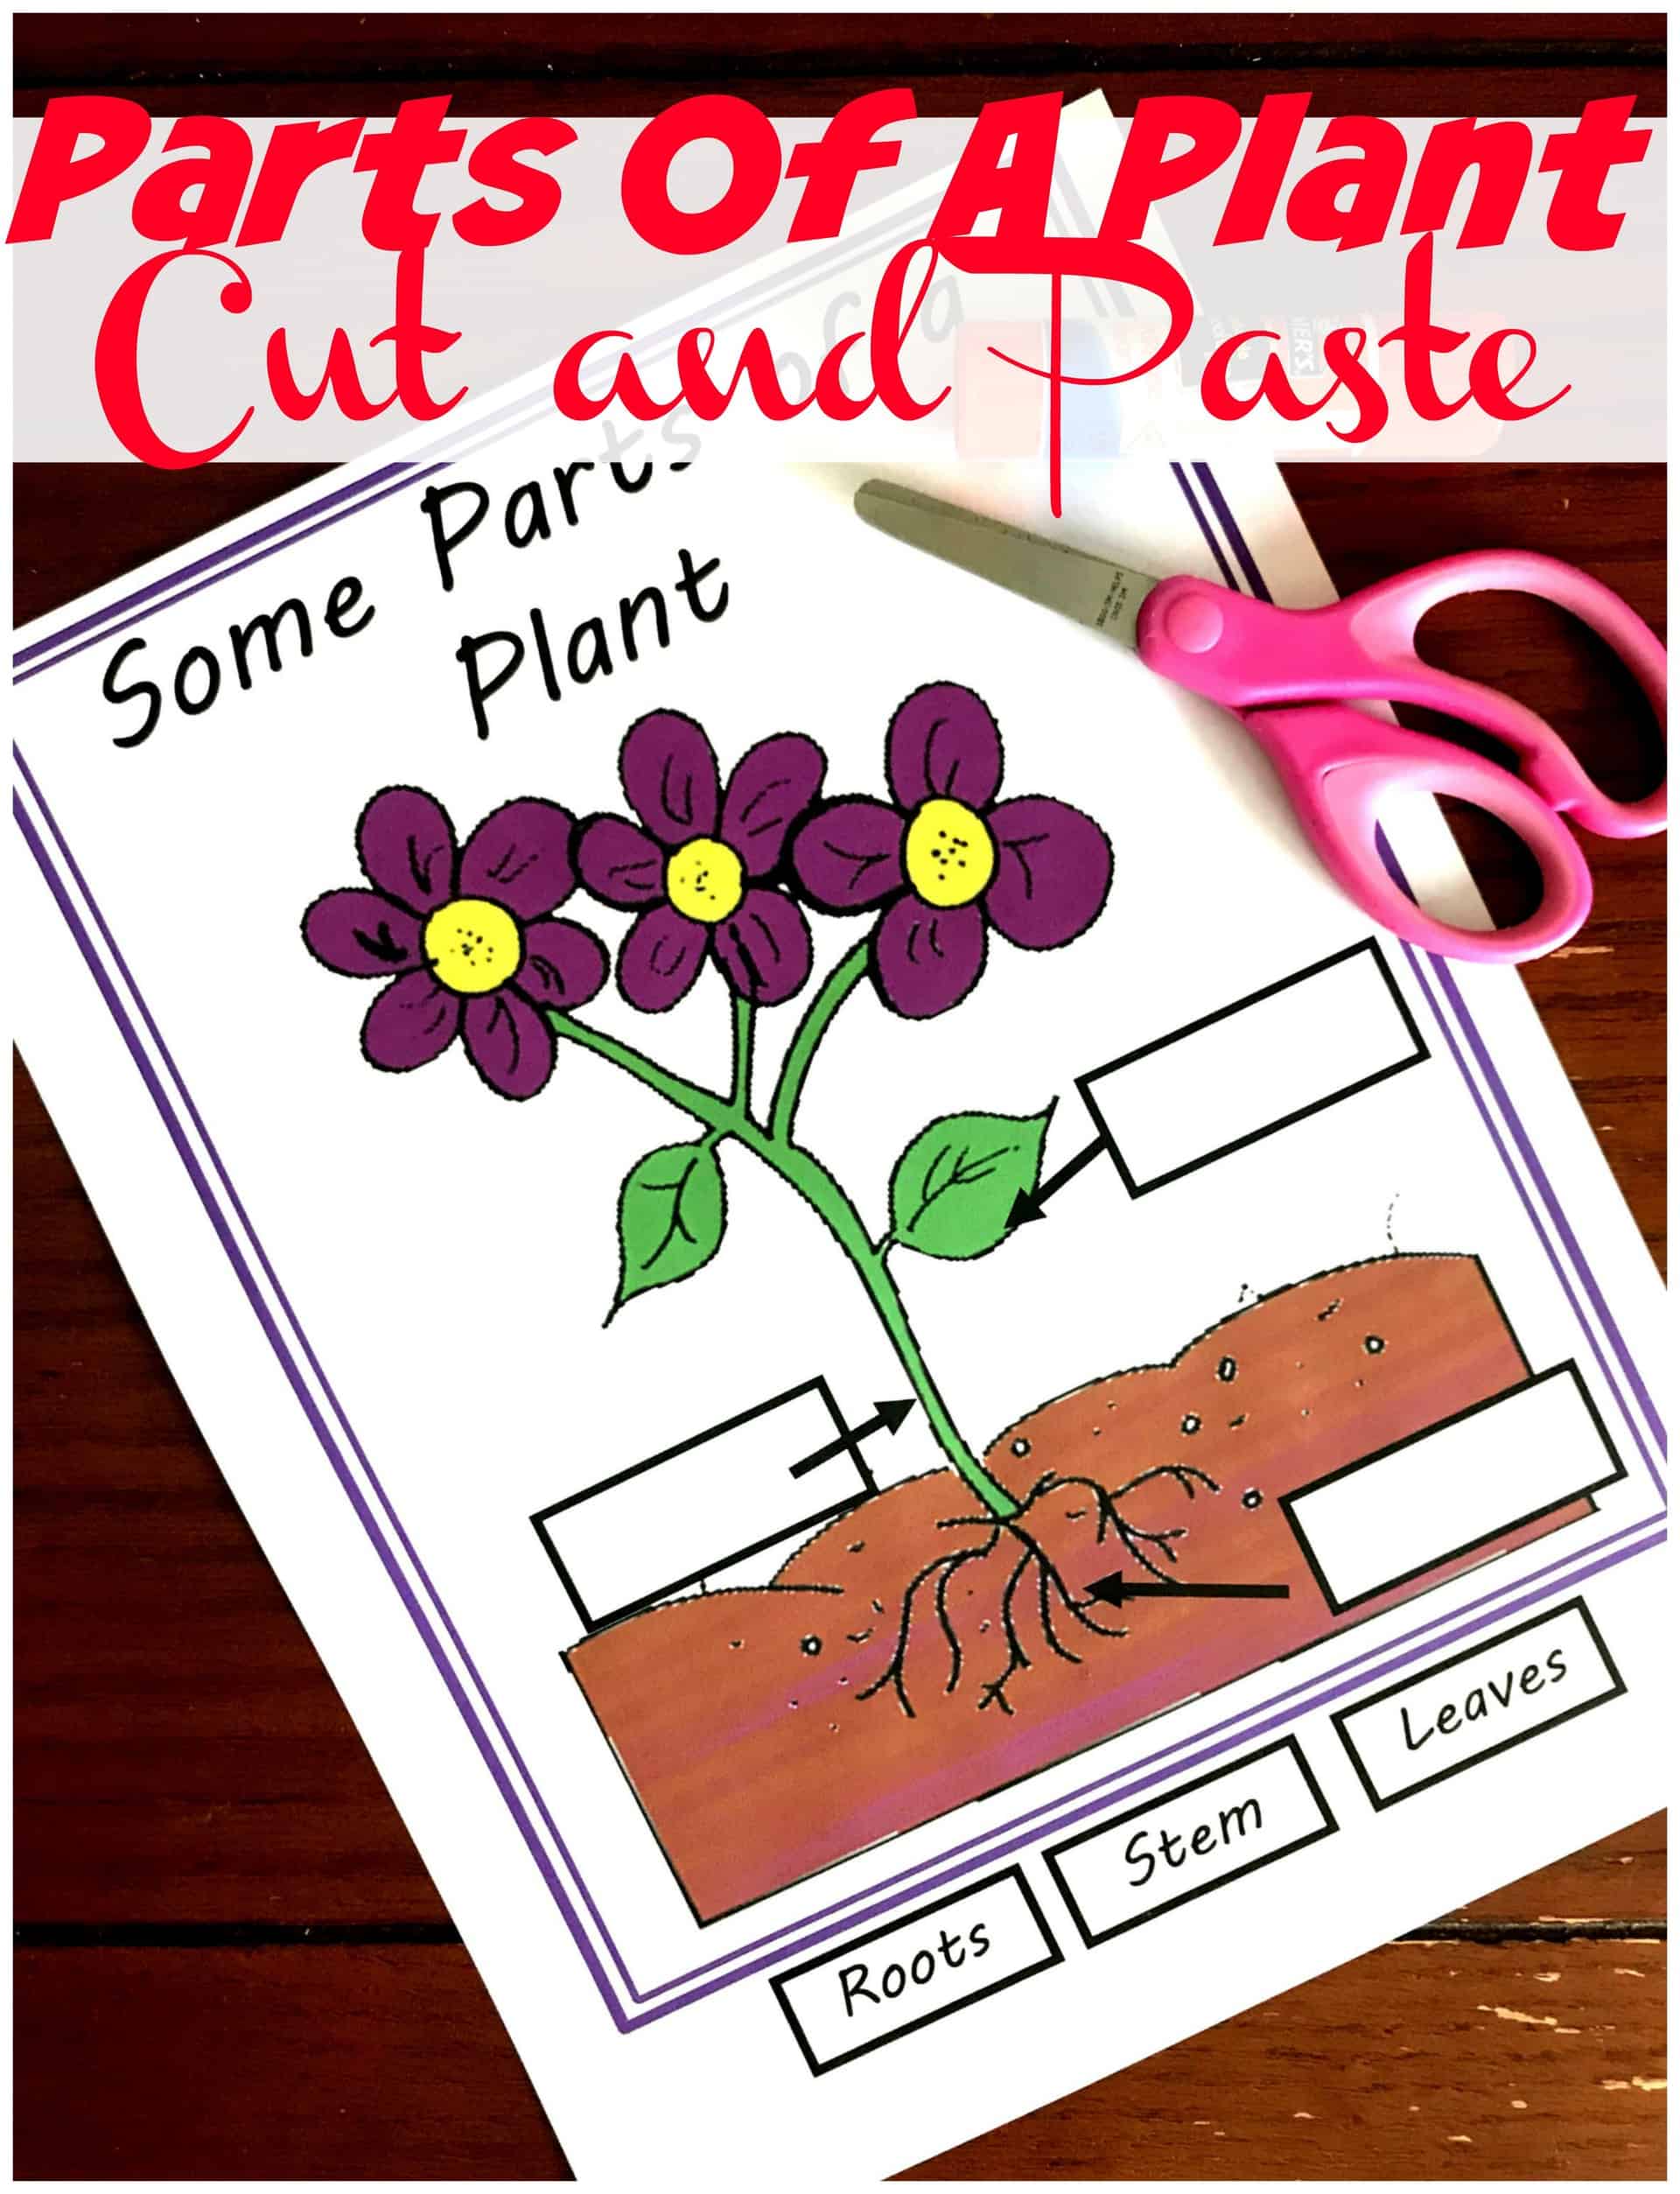 Grab these parts of a plant worksheet to practice where roots, stems, and leaves are on a plant. There are clip art pictures and real pictures to label. They are perfect for Science Cycle 1 Week 9.